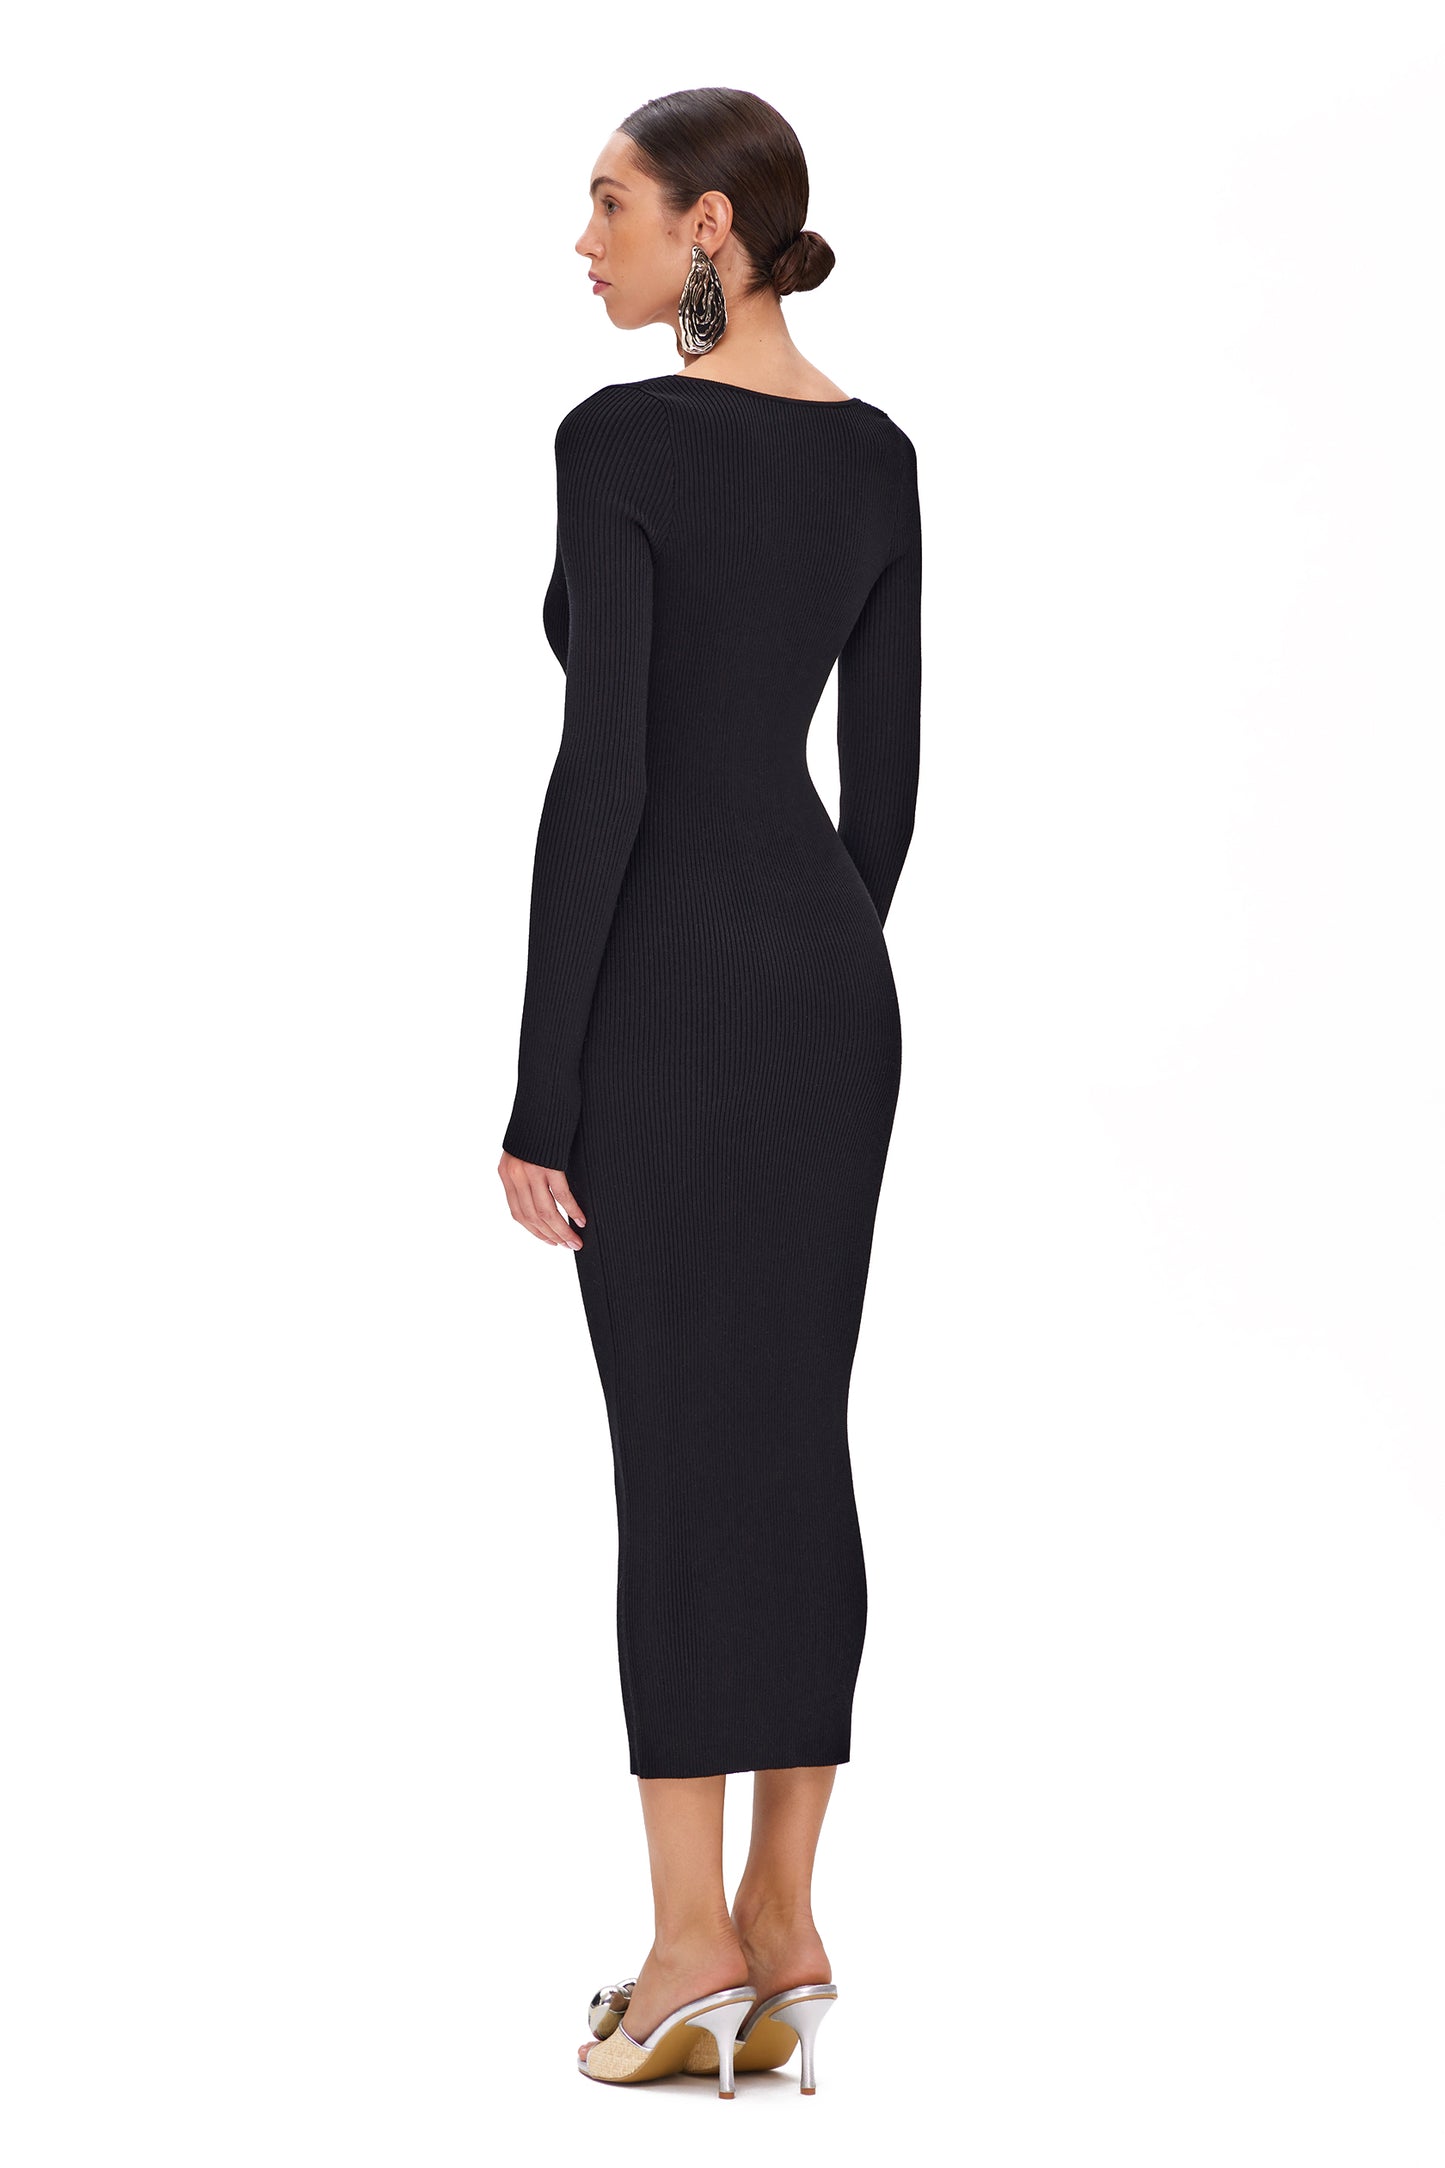 KNITTED COUTURE DRESS LONG-SLEEVES AND DEEP NECKLINE